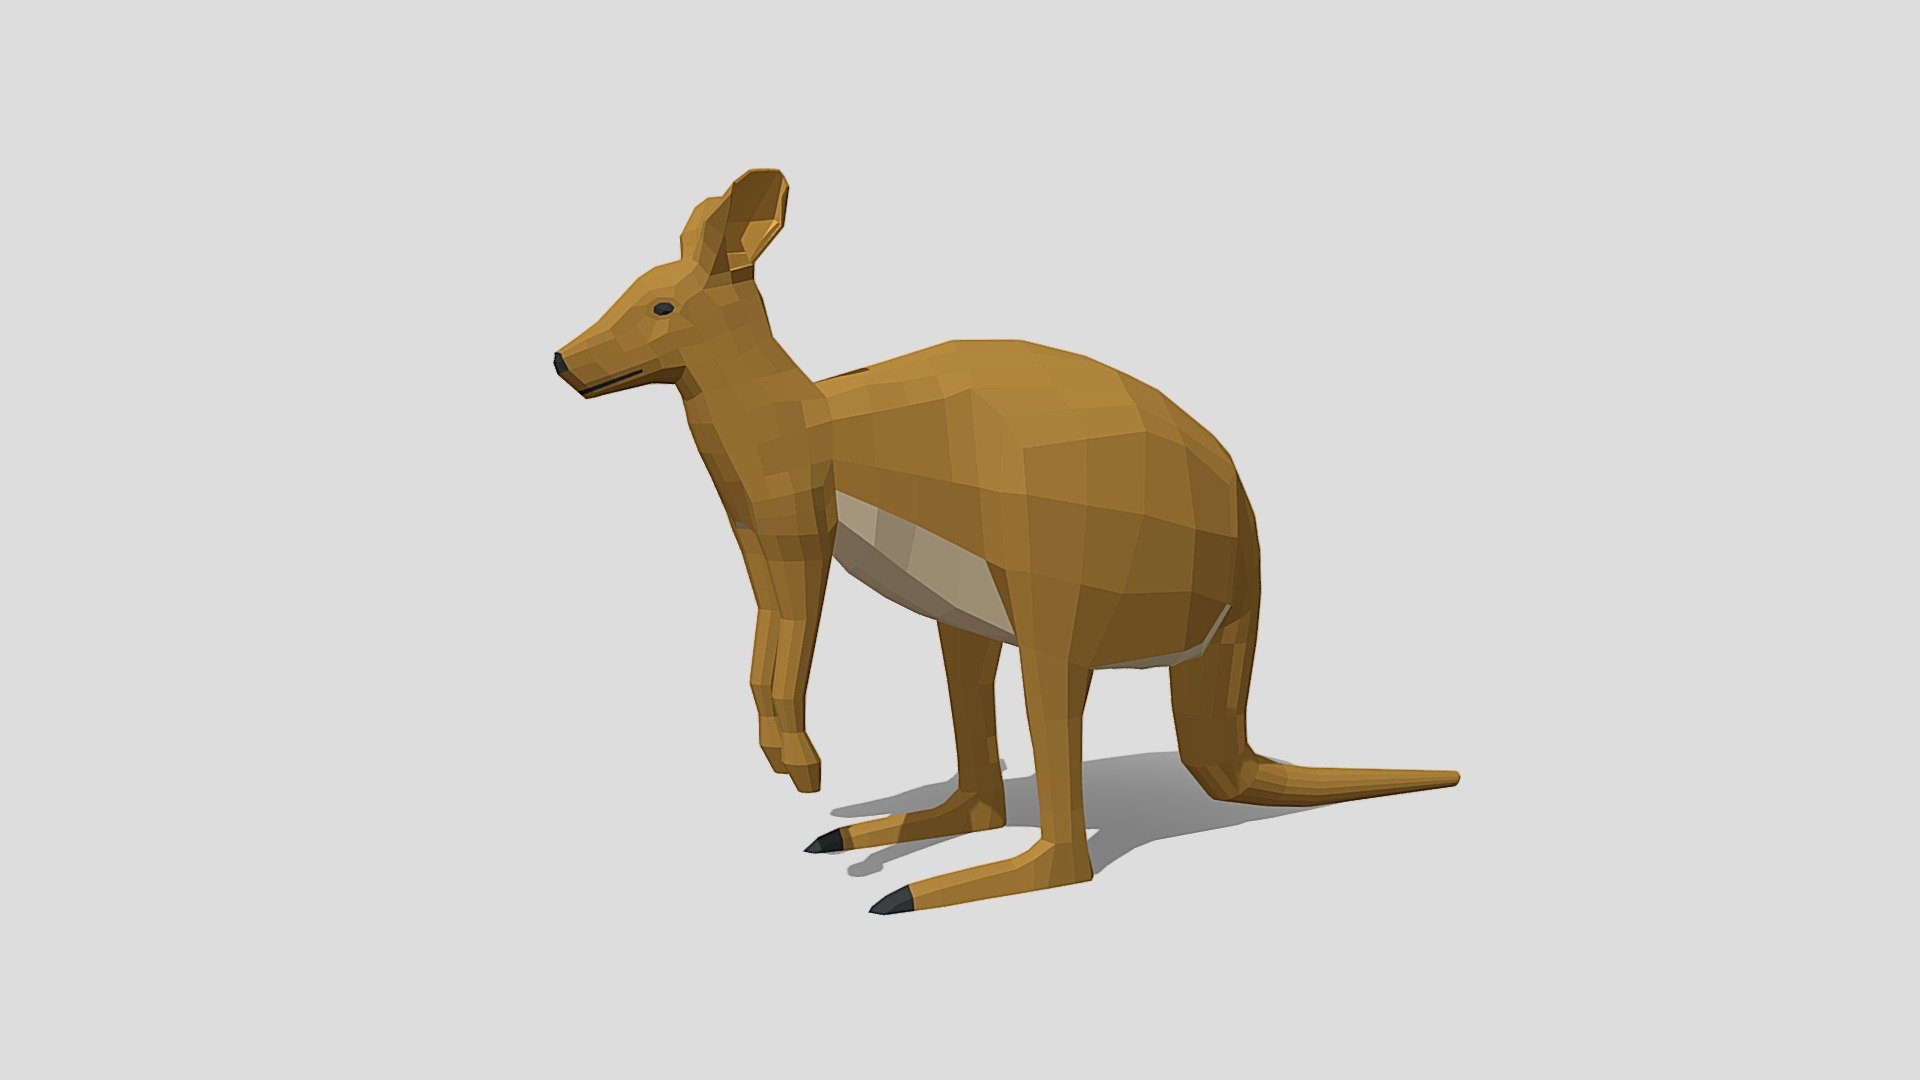 This is a low poly 3d model of a kangaroo. The low poly kangaroo was modelled and prepared for low-poly style renderings, background, general CG visualization presented as a mesh with quads.

Verts : 1.166 Faces: 1.164

This model have simple materials with diffuse colors.

No ring, maps and no UVW mapping is available.

The original file was created in blender. You will receive a 3DS, OBJ, FBX, blend, DAE, Stl.

All preview images were rendered with Blender Cycles. Product is ready to render out-of-the-box. Please note that the lights, cameras, and background is only included in the .blend file. The model is clean and alone in the other provided files, centred at origin and has real-world scale 3d model